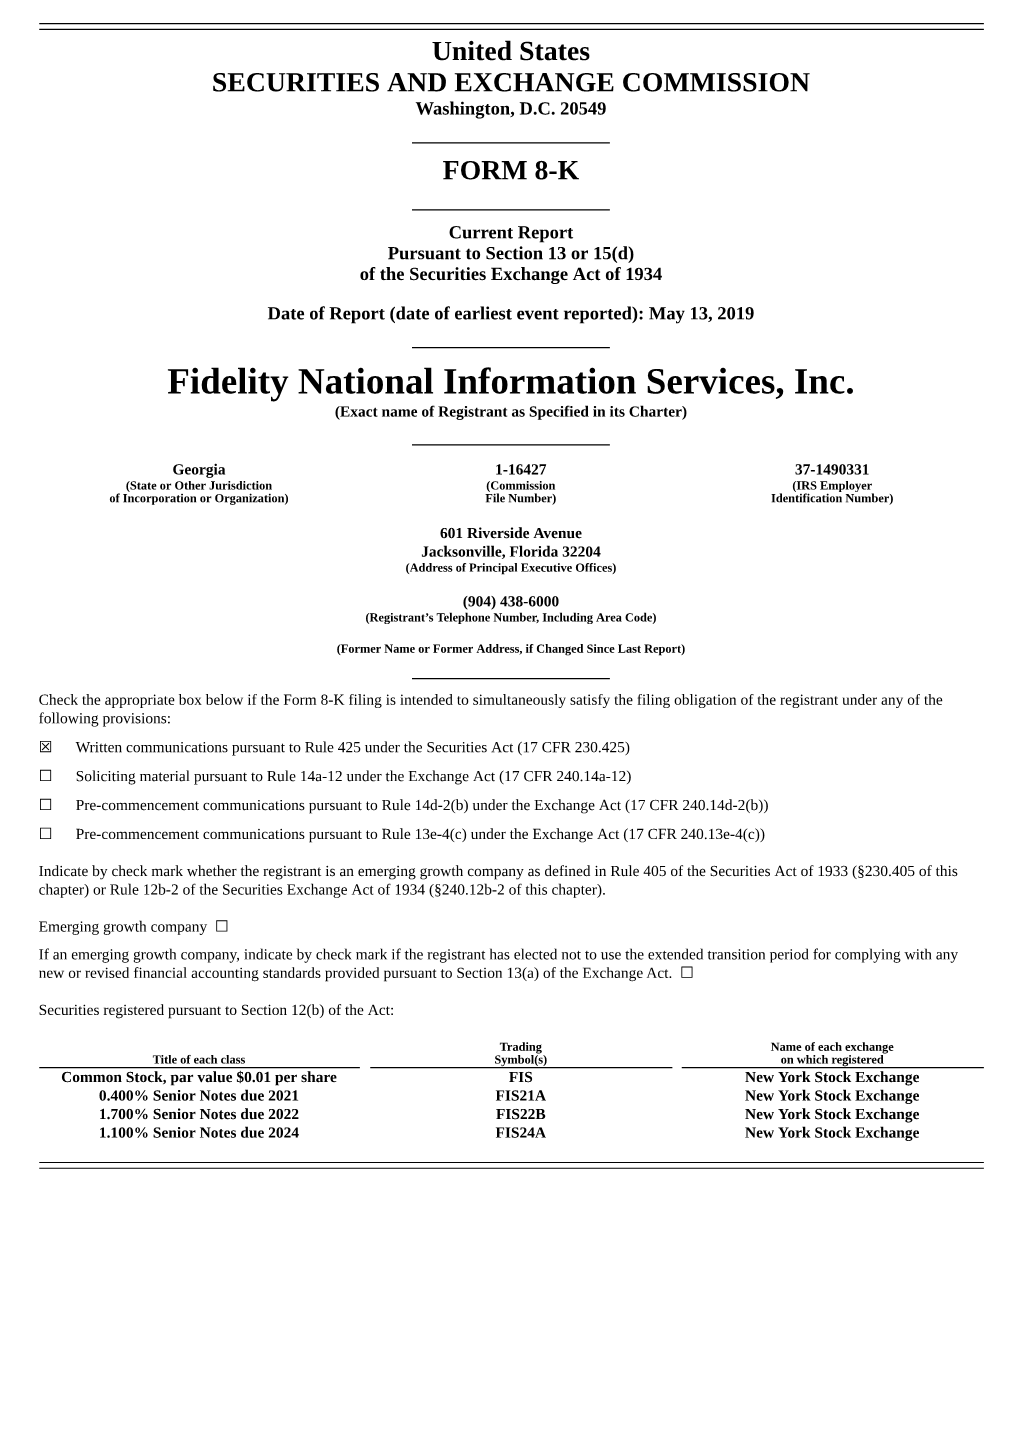 Fidelity National Information Services, Inc. (Exact Name of Registrant As Specified in Its Charter)